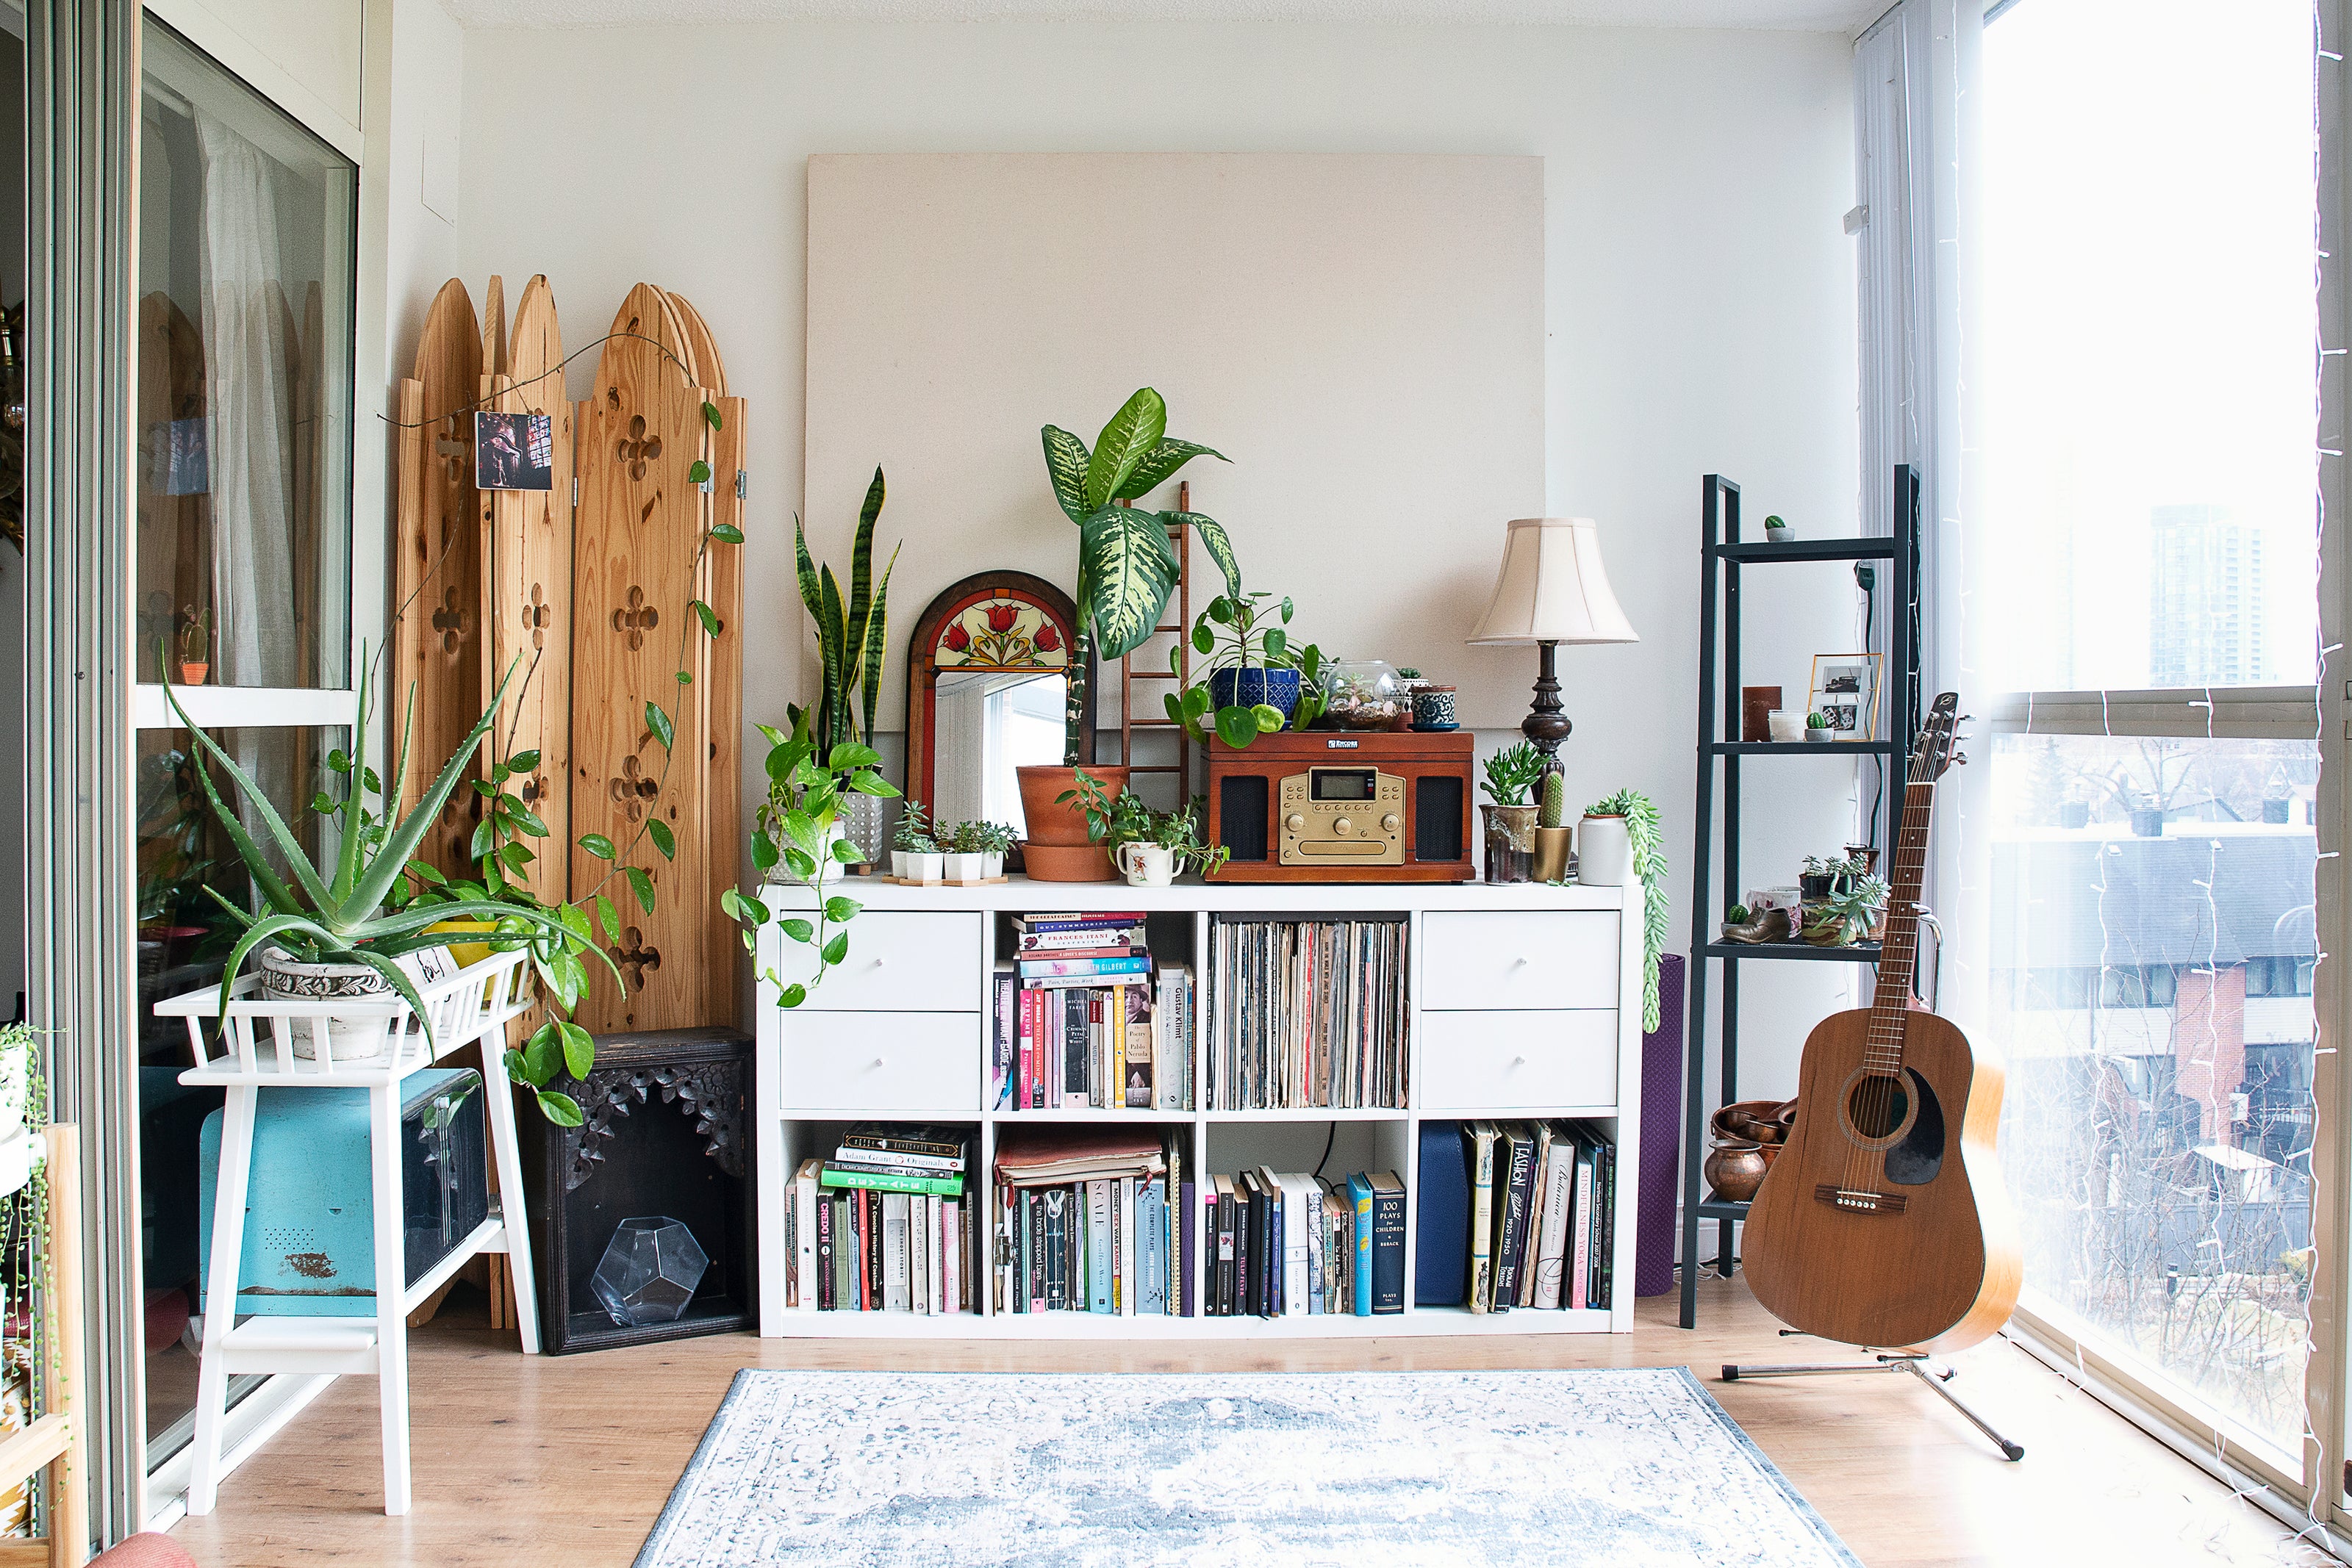 Home Decor with mini showcase having mini flower pot, figurines A guitar in the room. Bookshelf containing books, a lamp on top of it. Plant stand with a potted plant, rug on the floorboard